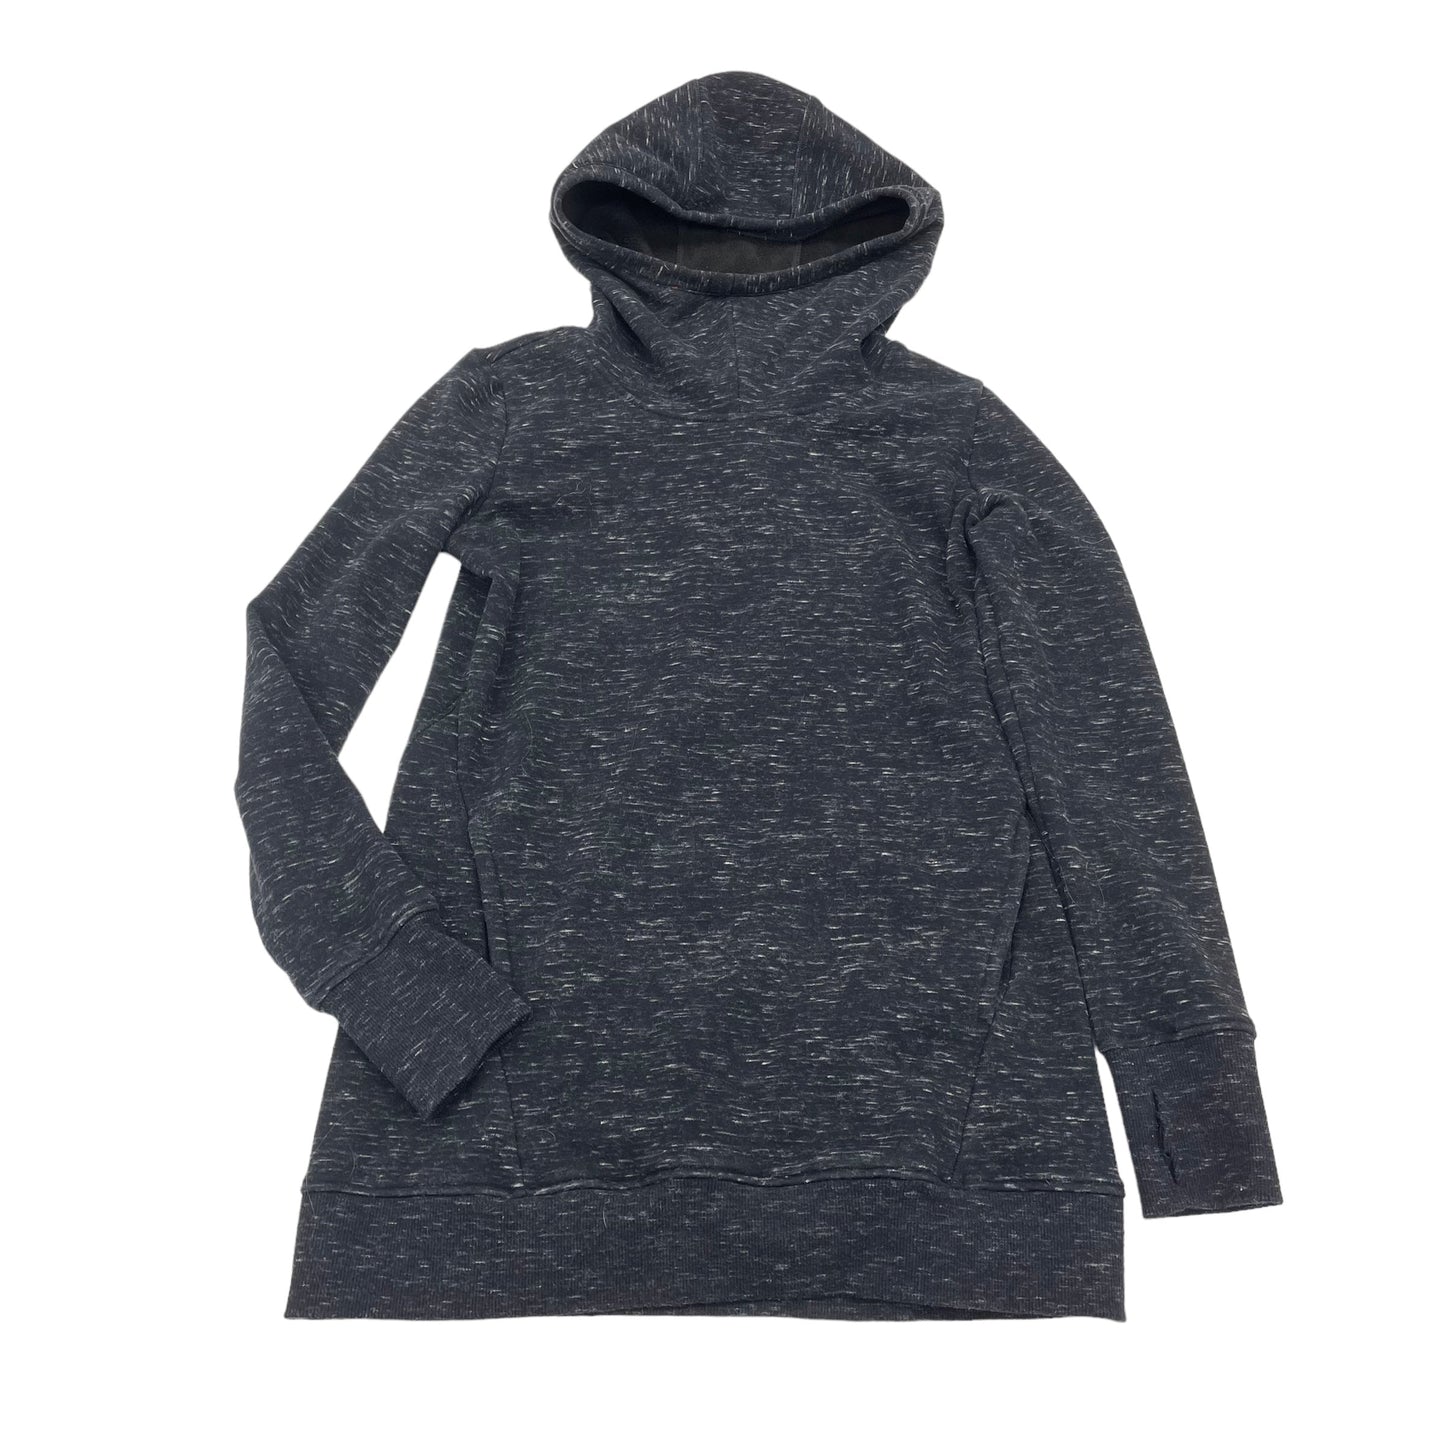 Athletic Sweatshirt Hoodie By 90 Degrees By Reflex  Size: S